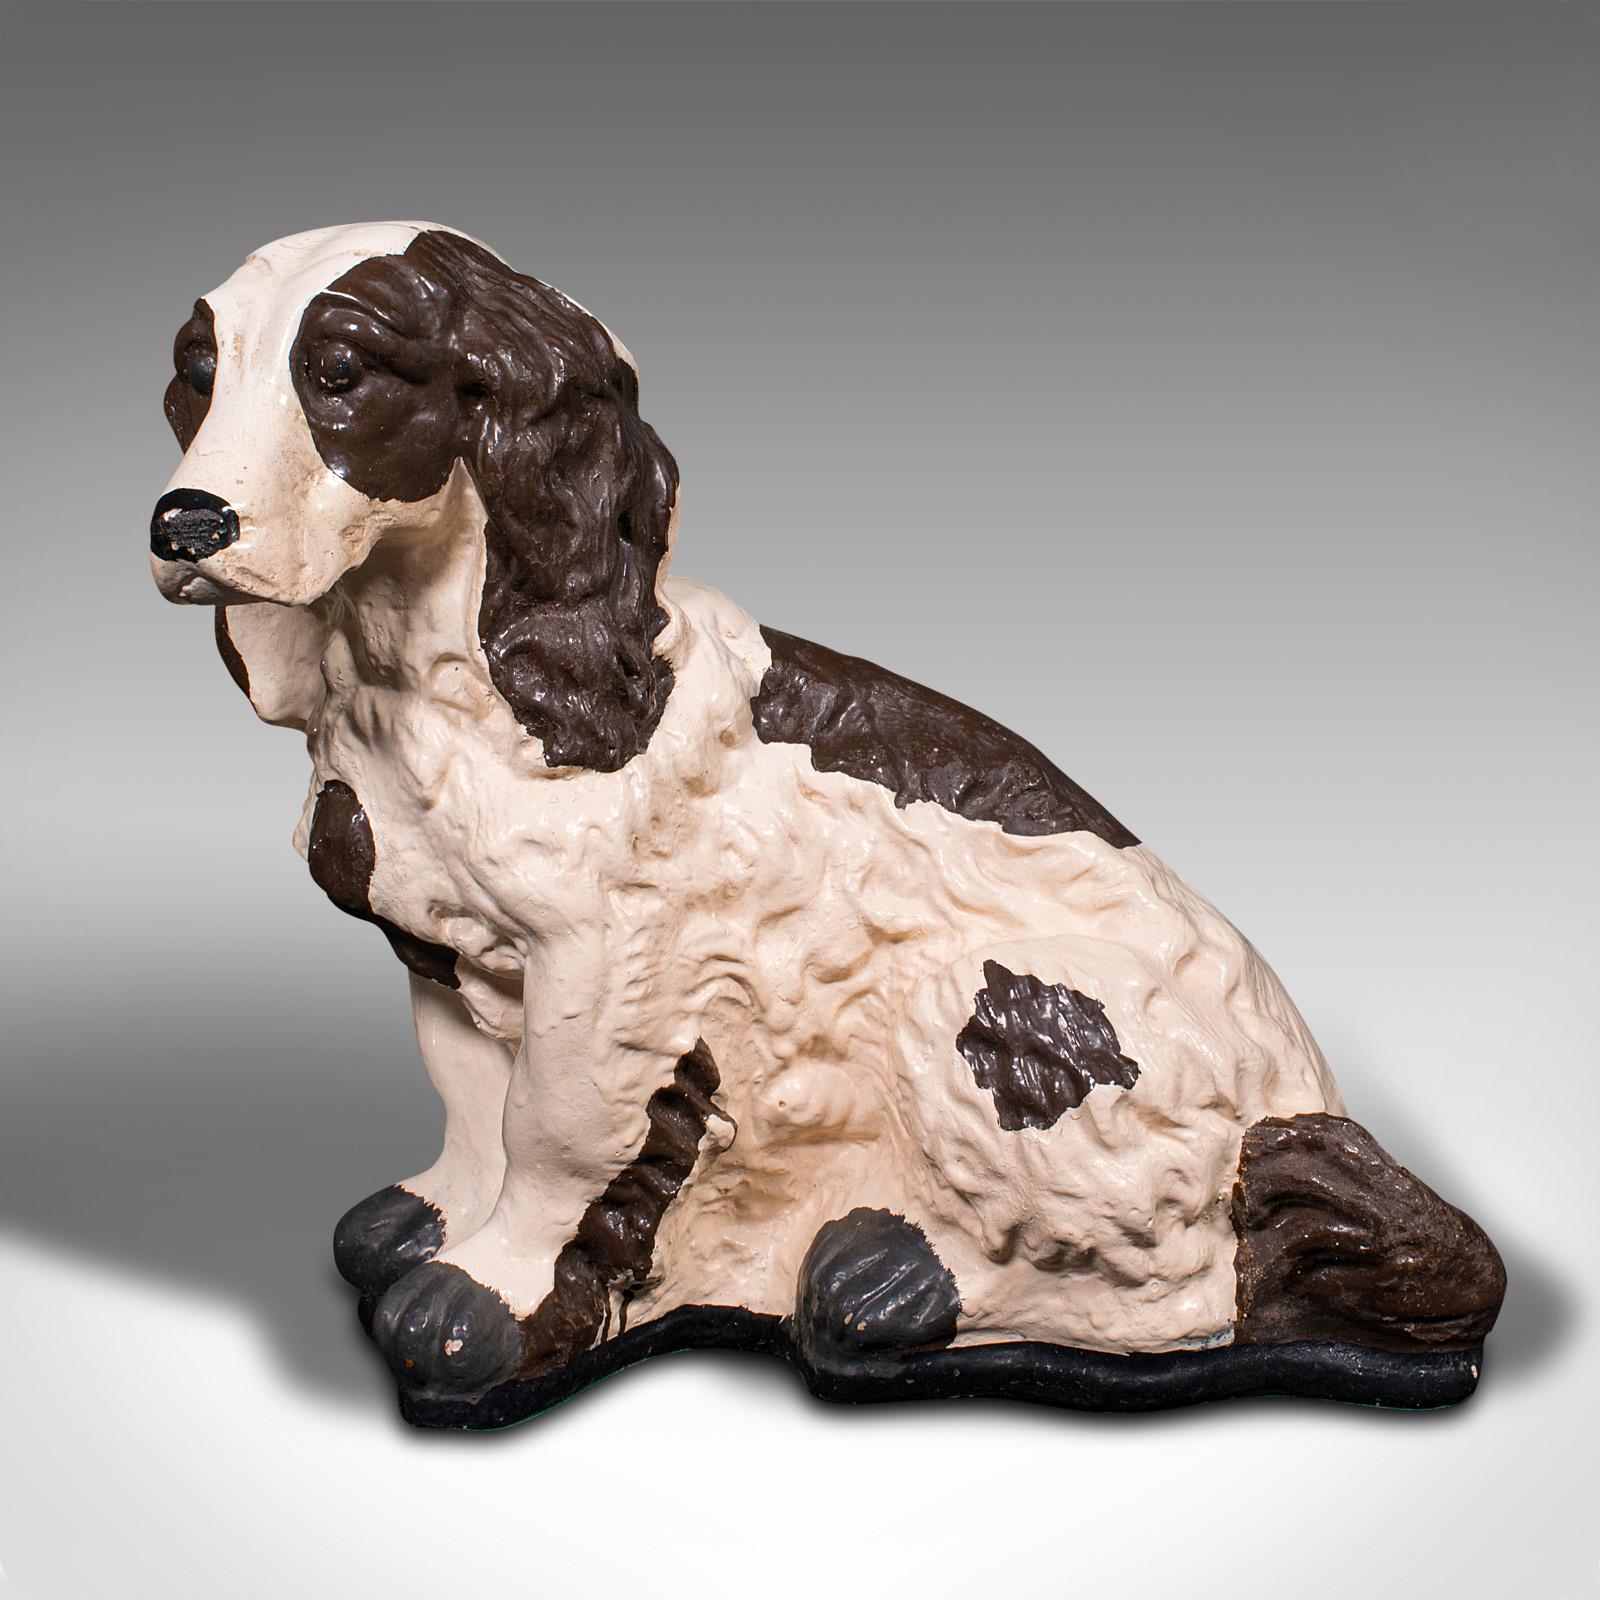 This is an antique cocker spaniel statue. An English, plasterwork dog figure, dating to the late Victorian period, circa 1900.

Fine decorative specimen of the popular breed
Displays a desirable aged patina and in good original order
Quality